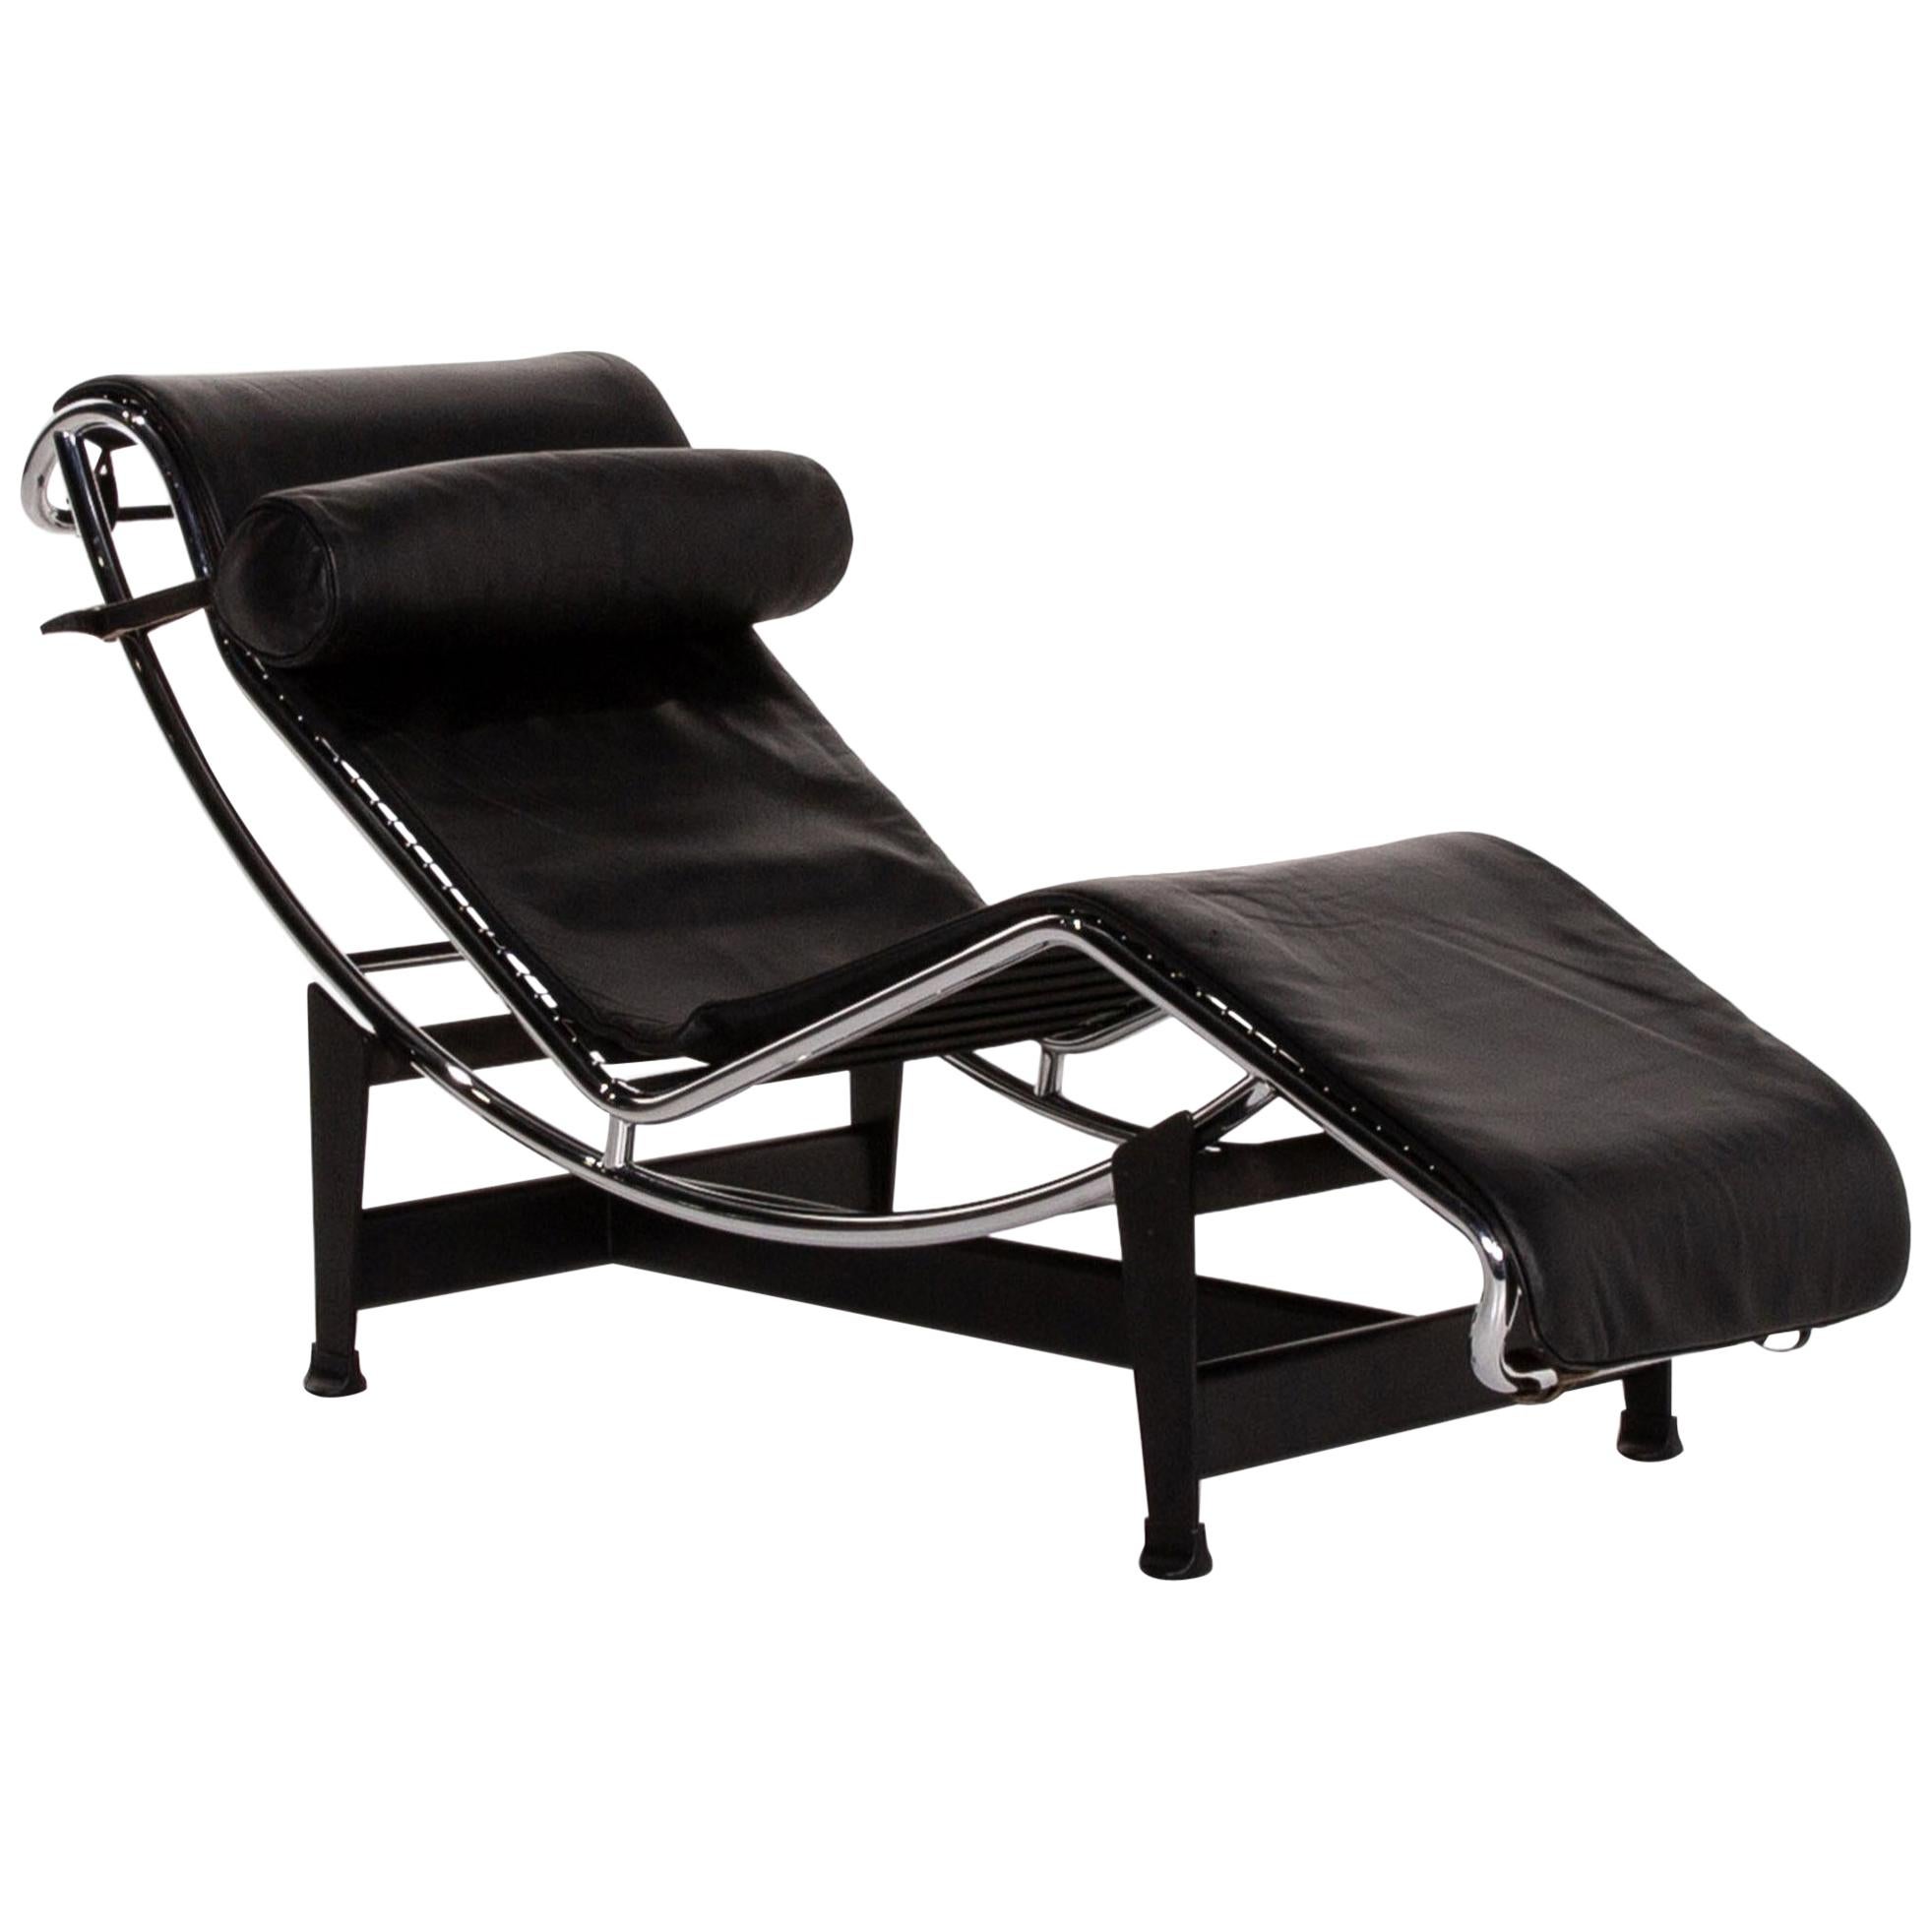 Cassina Le Corbusier LC 4 Leather Lounger Black Relax Lounger Relax Function For Sale